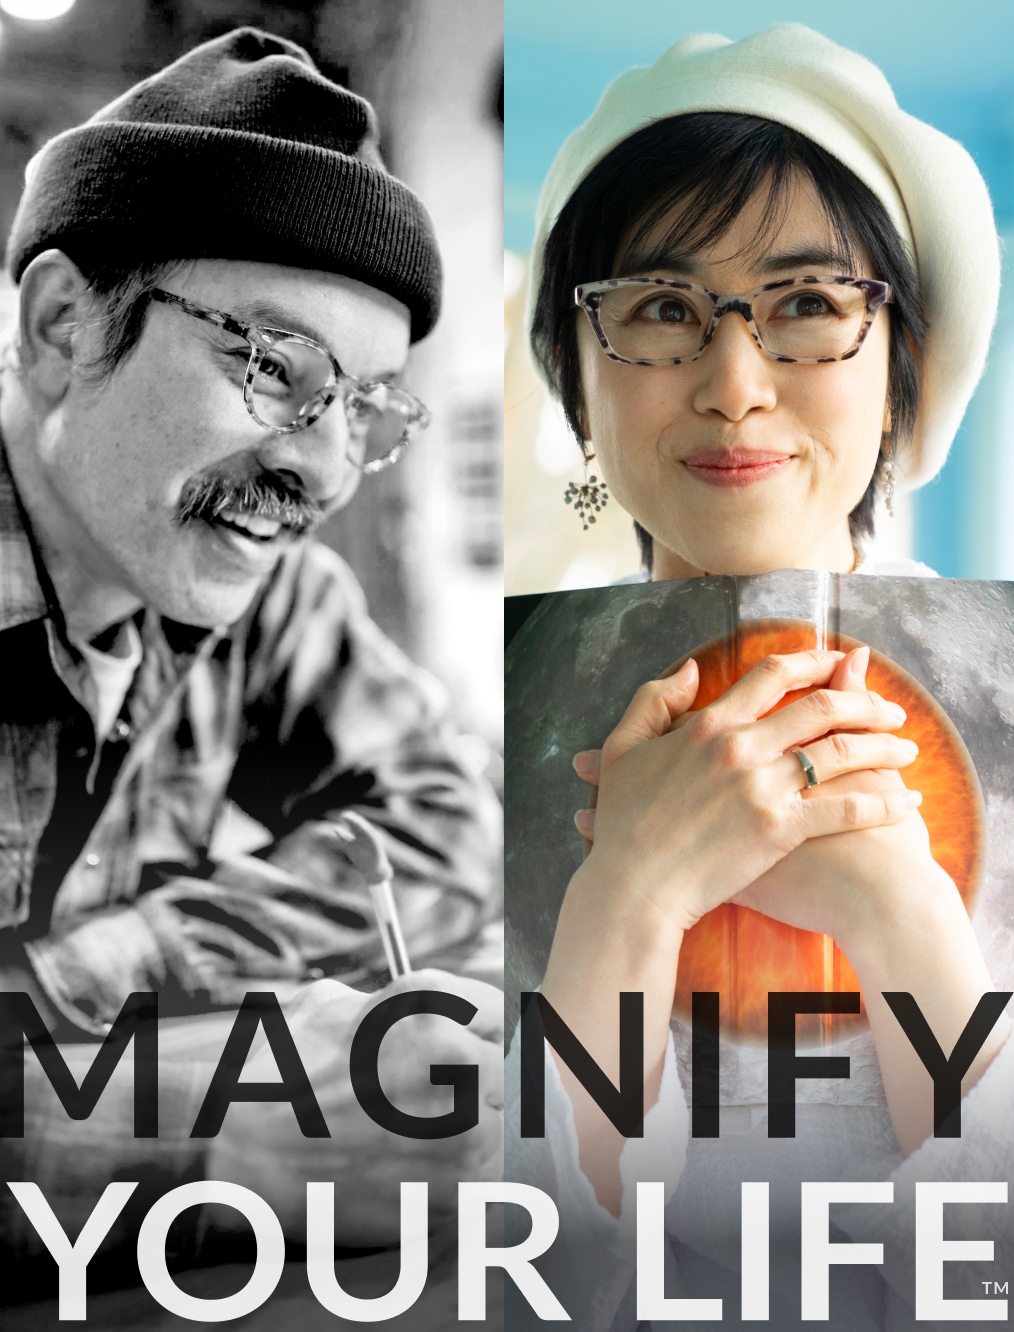 Magnify your life. Two images of models wearing Zenni glasses, one in black and white, and the other in color.